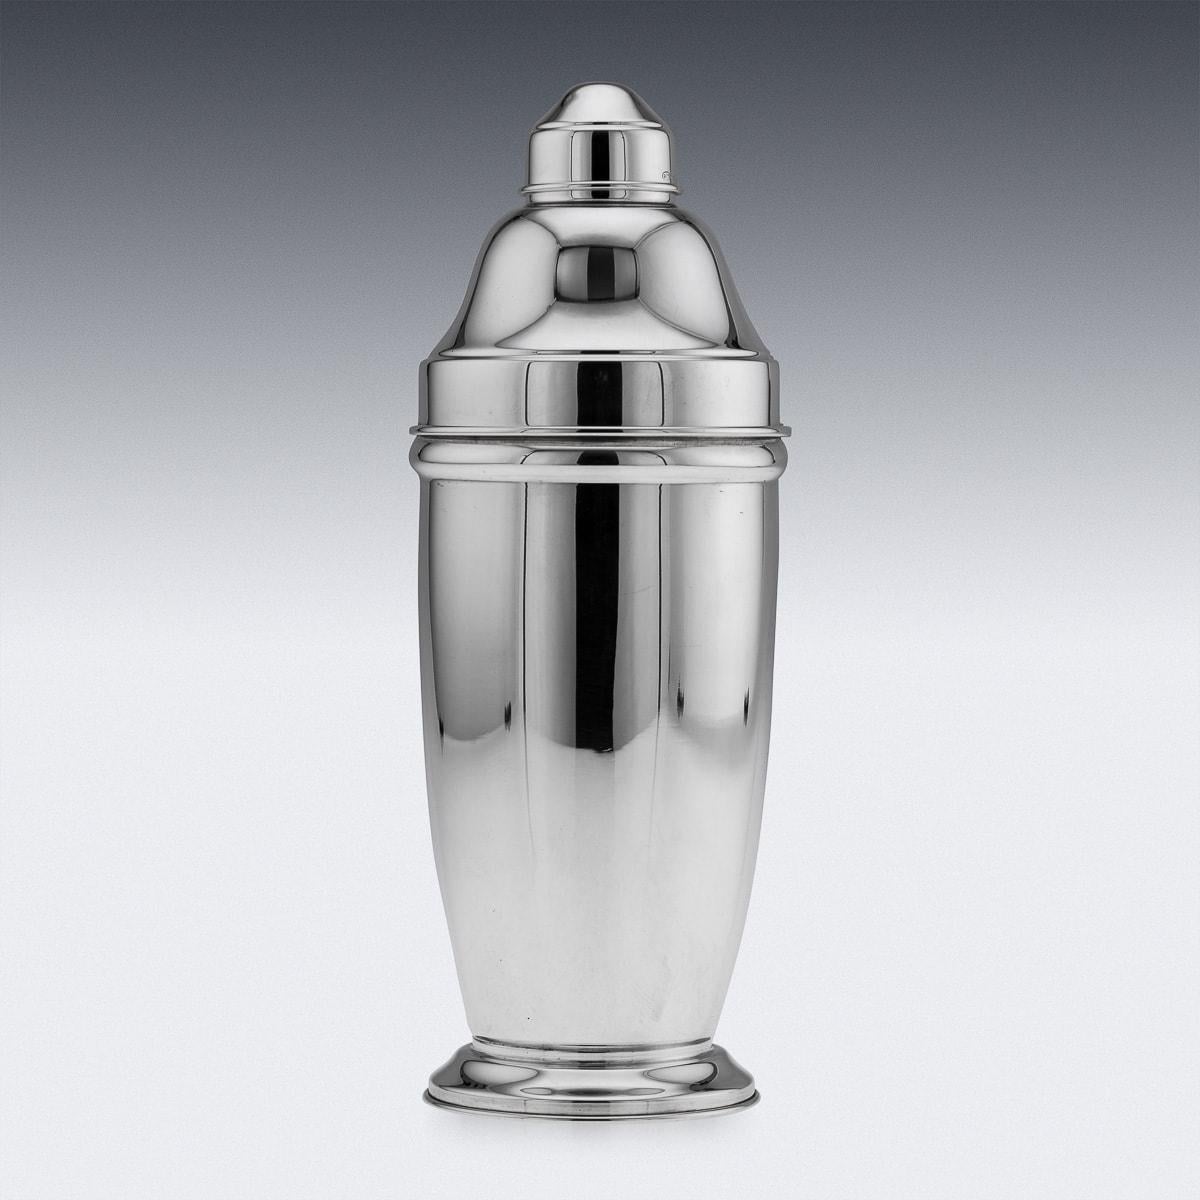 Italian Superb Fabergé Solid Silver Cocktail Shaker